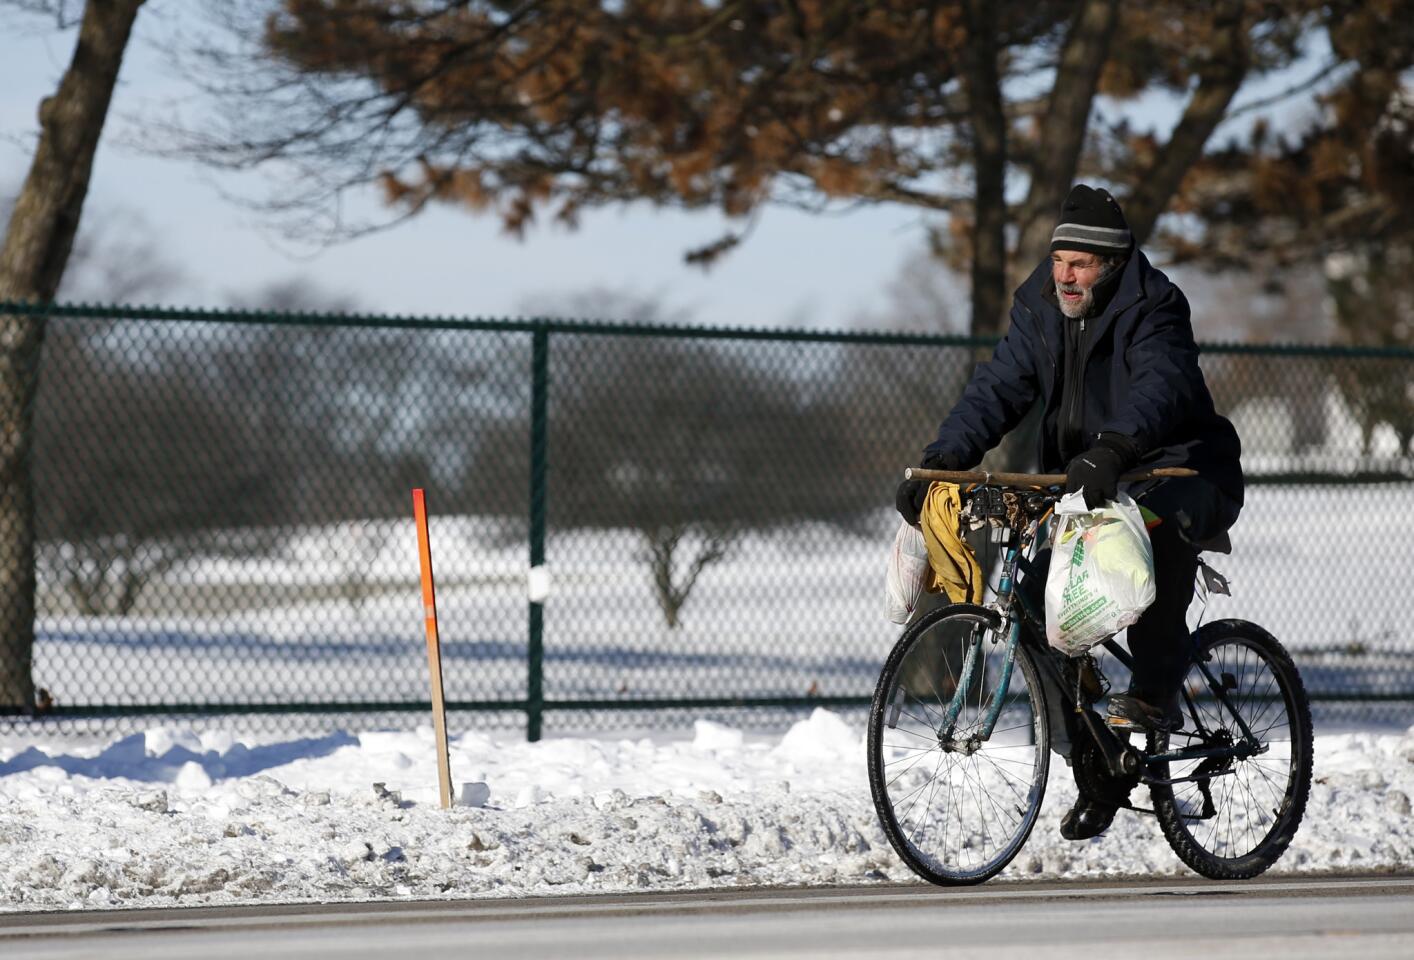 Cold snap hits Midwest and Northeast